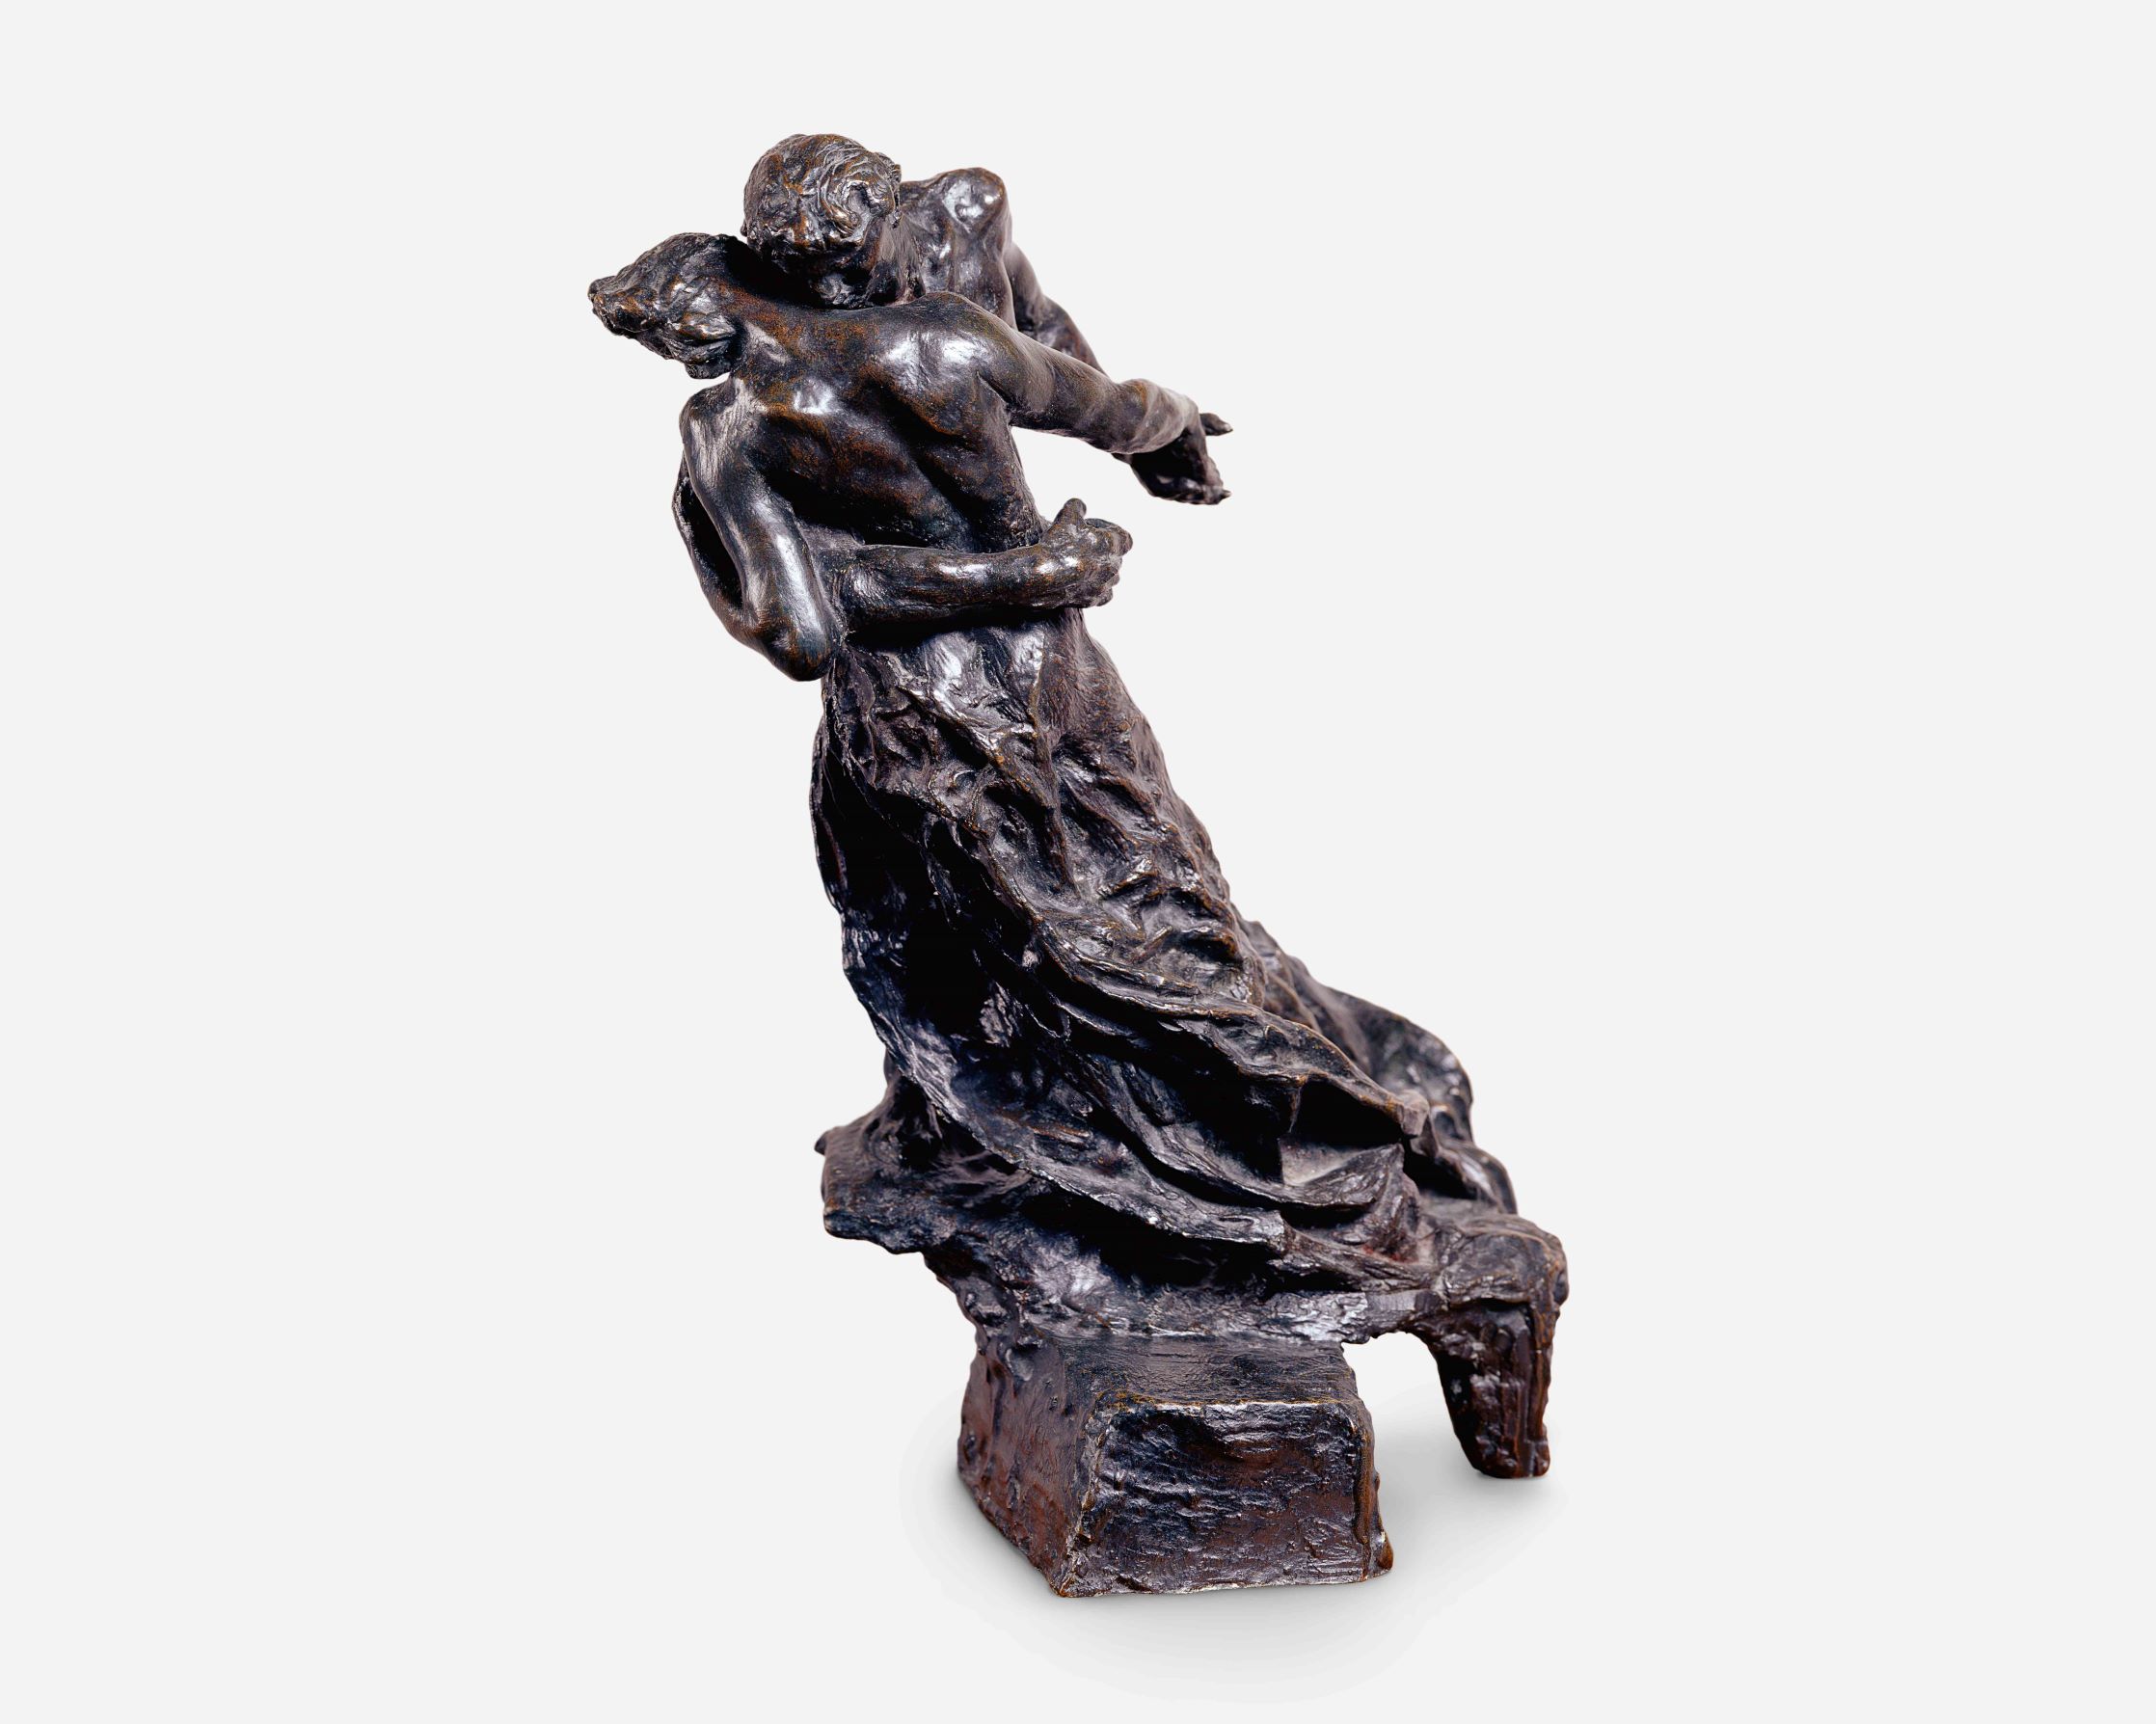 The Waltz (c.1893) by Camille Claudel